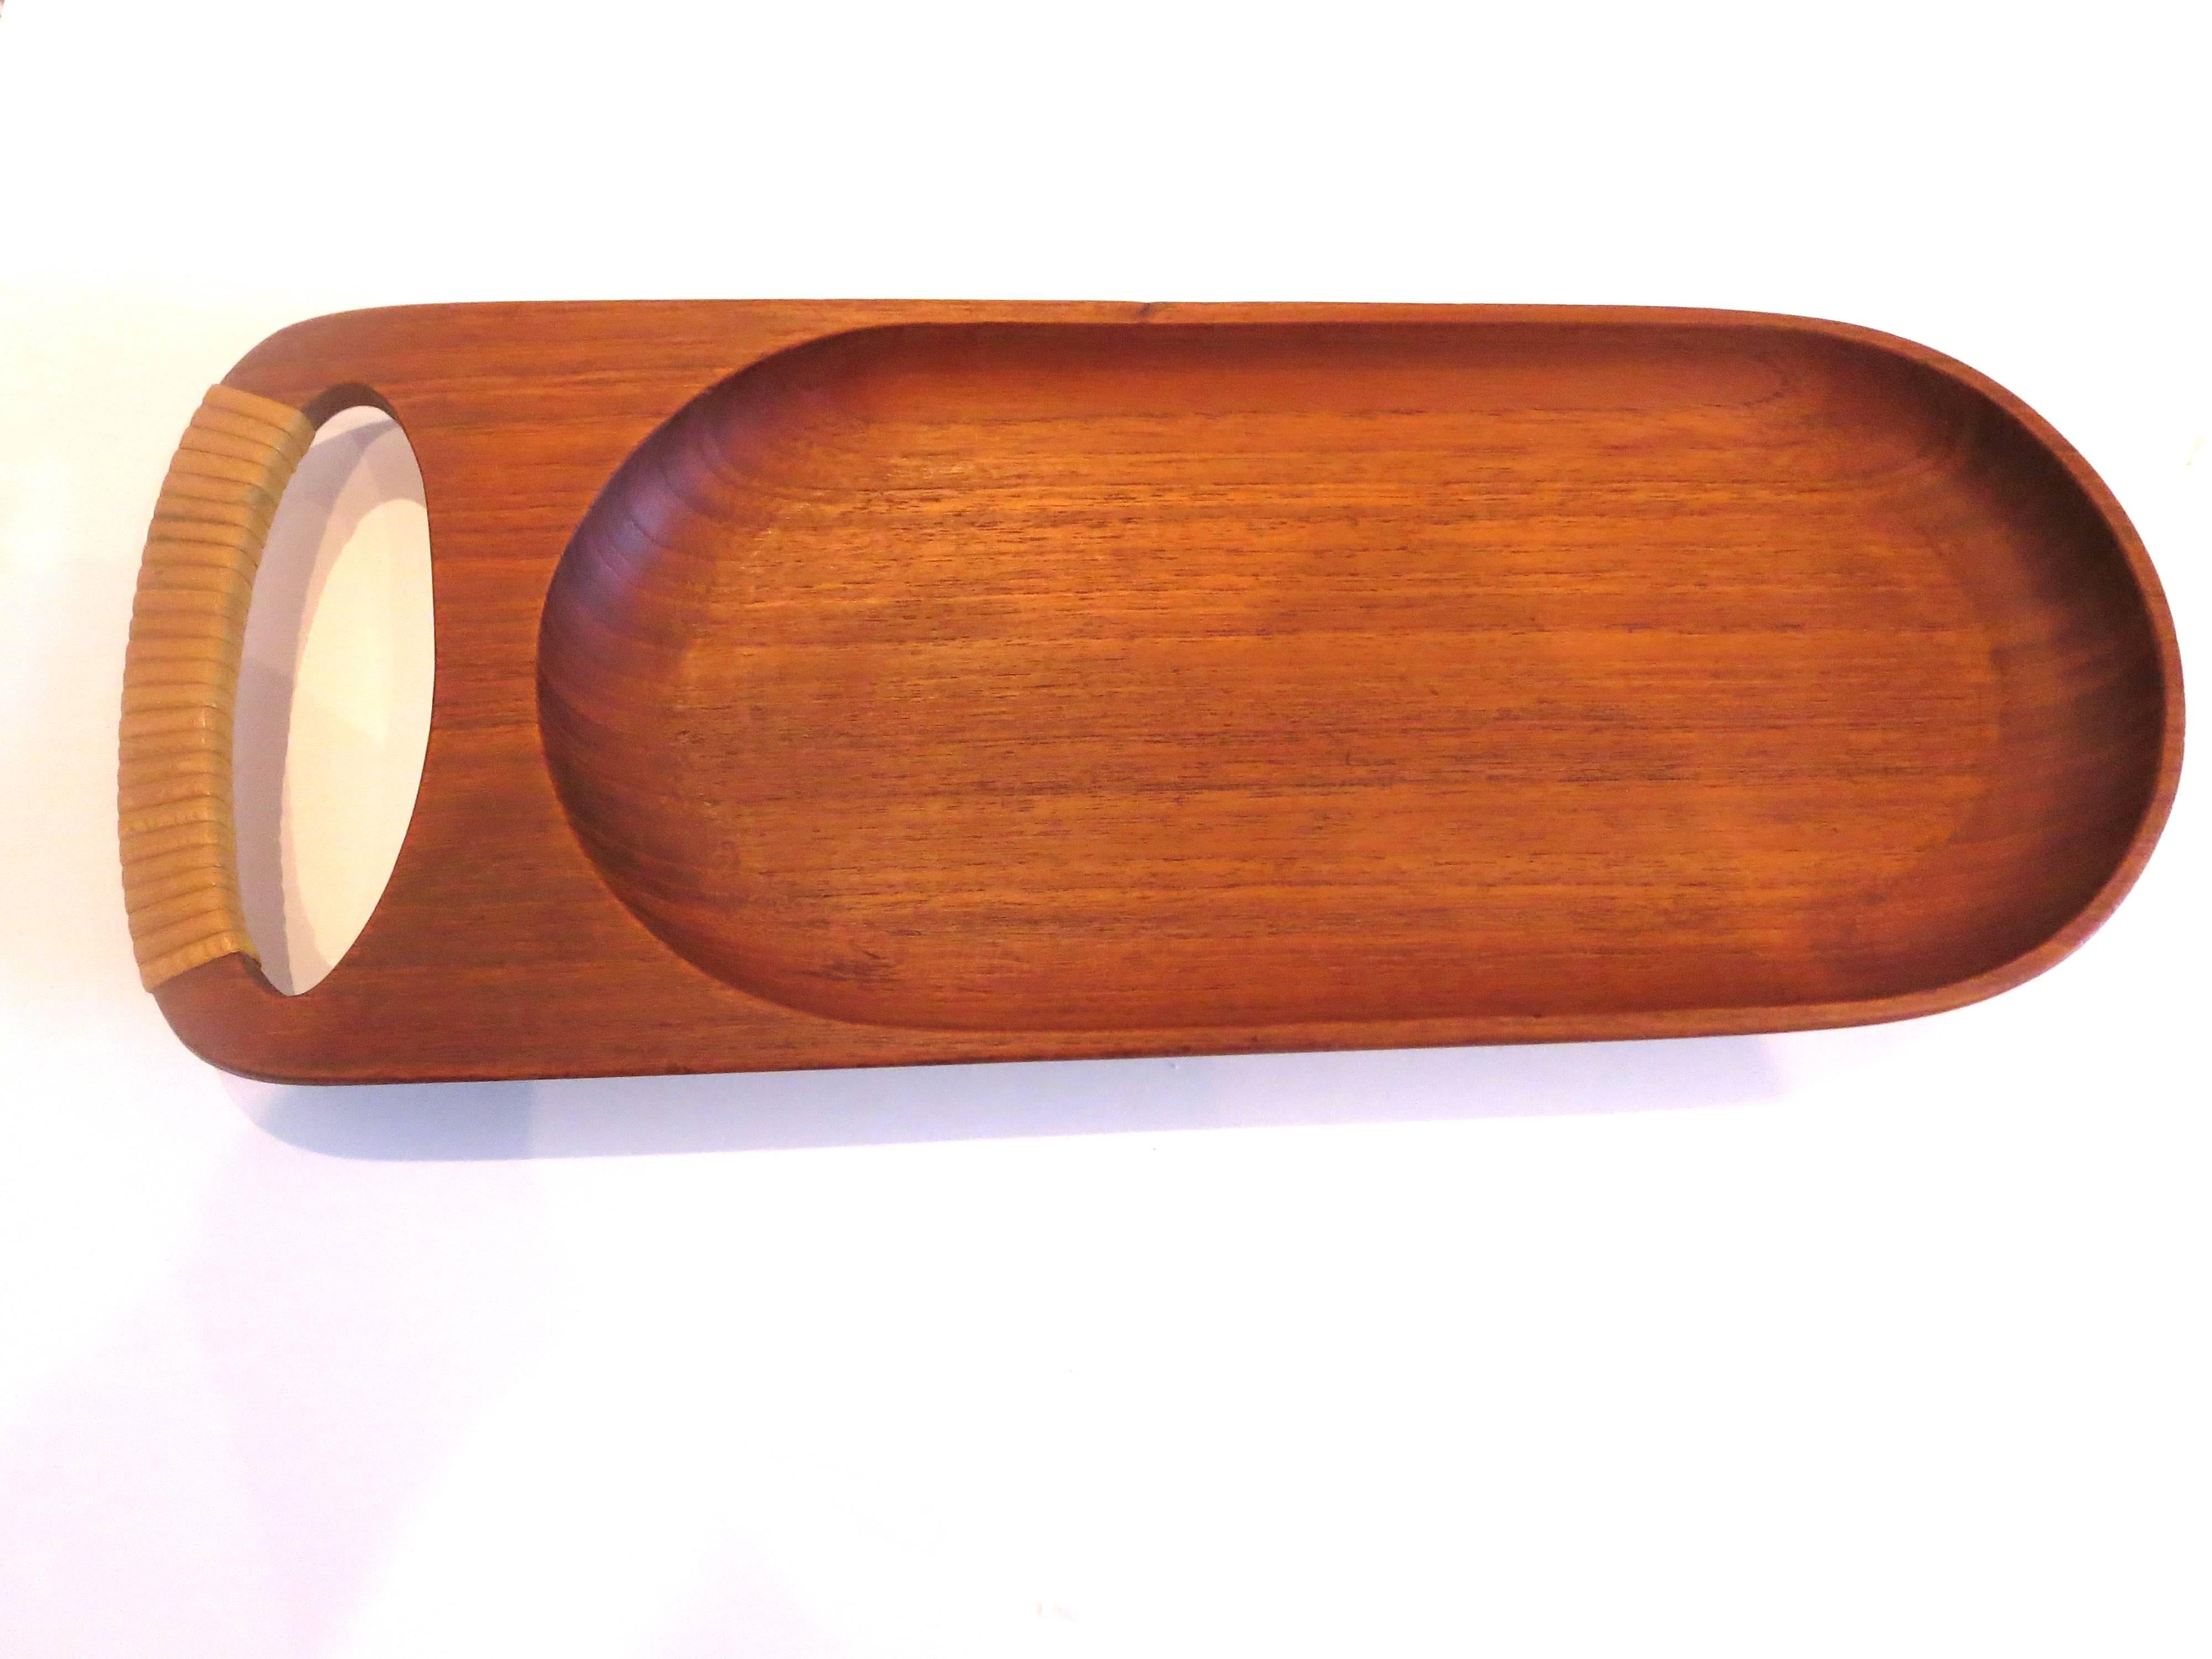 Unique rare solid teak sculpted tray with cane handle, circa 1950s freshly restored, simple and elegant.